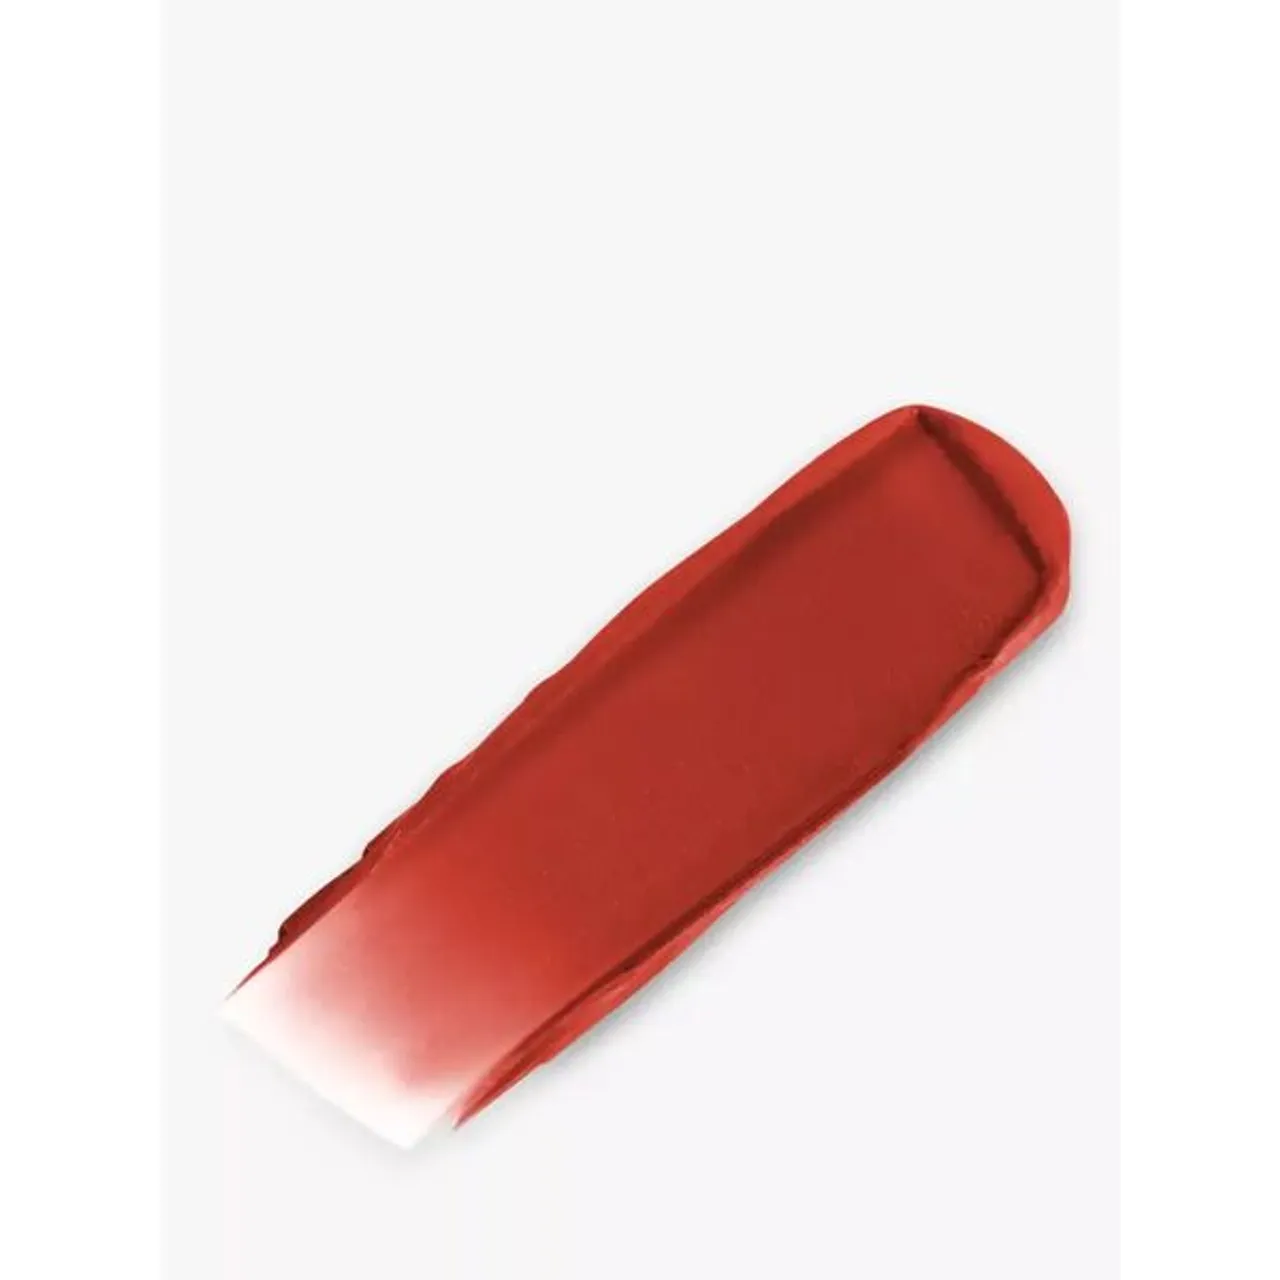 LancÃ´me L'Absolu Rouge Intimatte Lipstick - 196 French Touch - Unisex